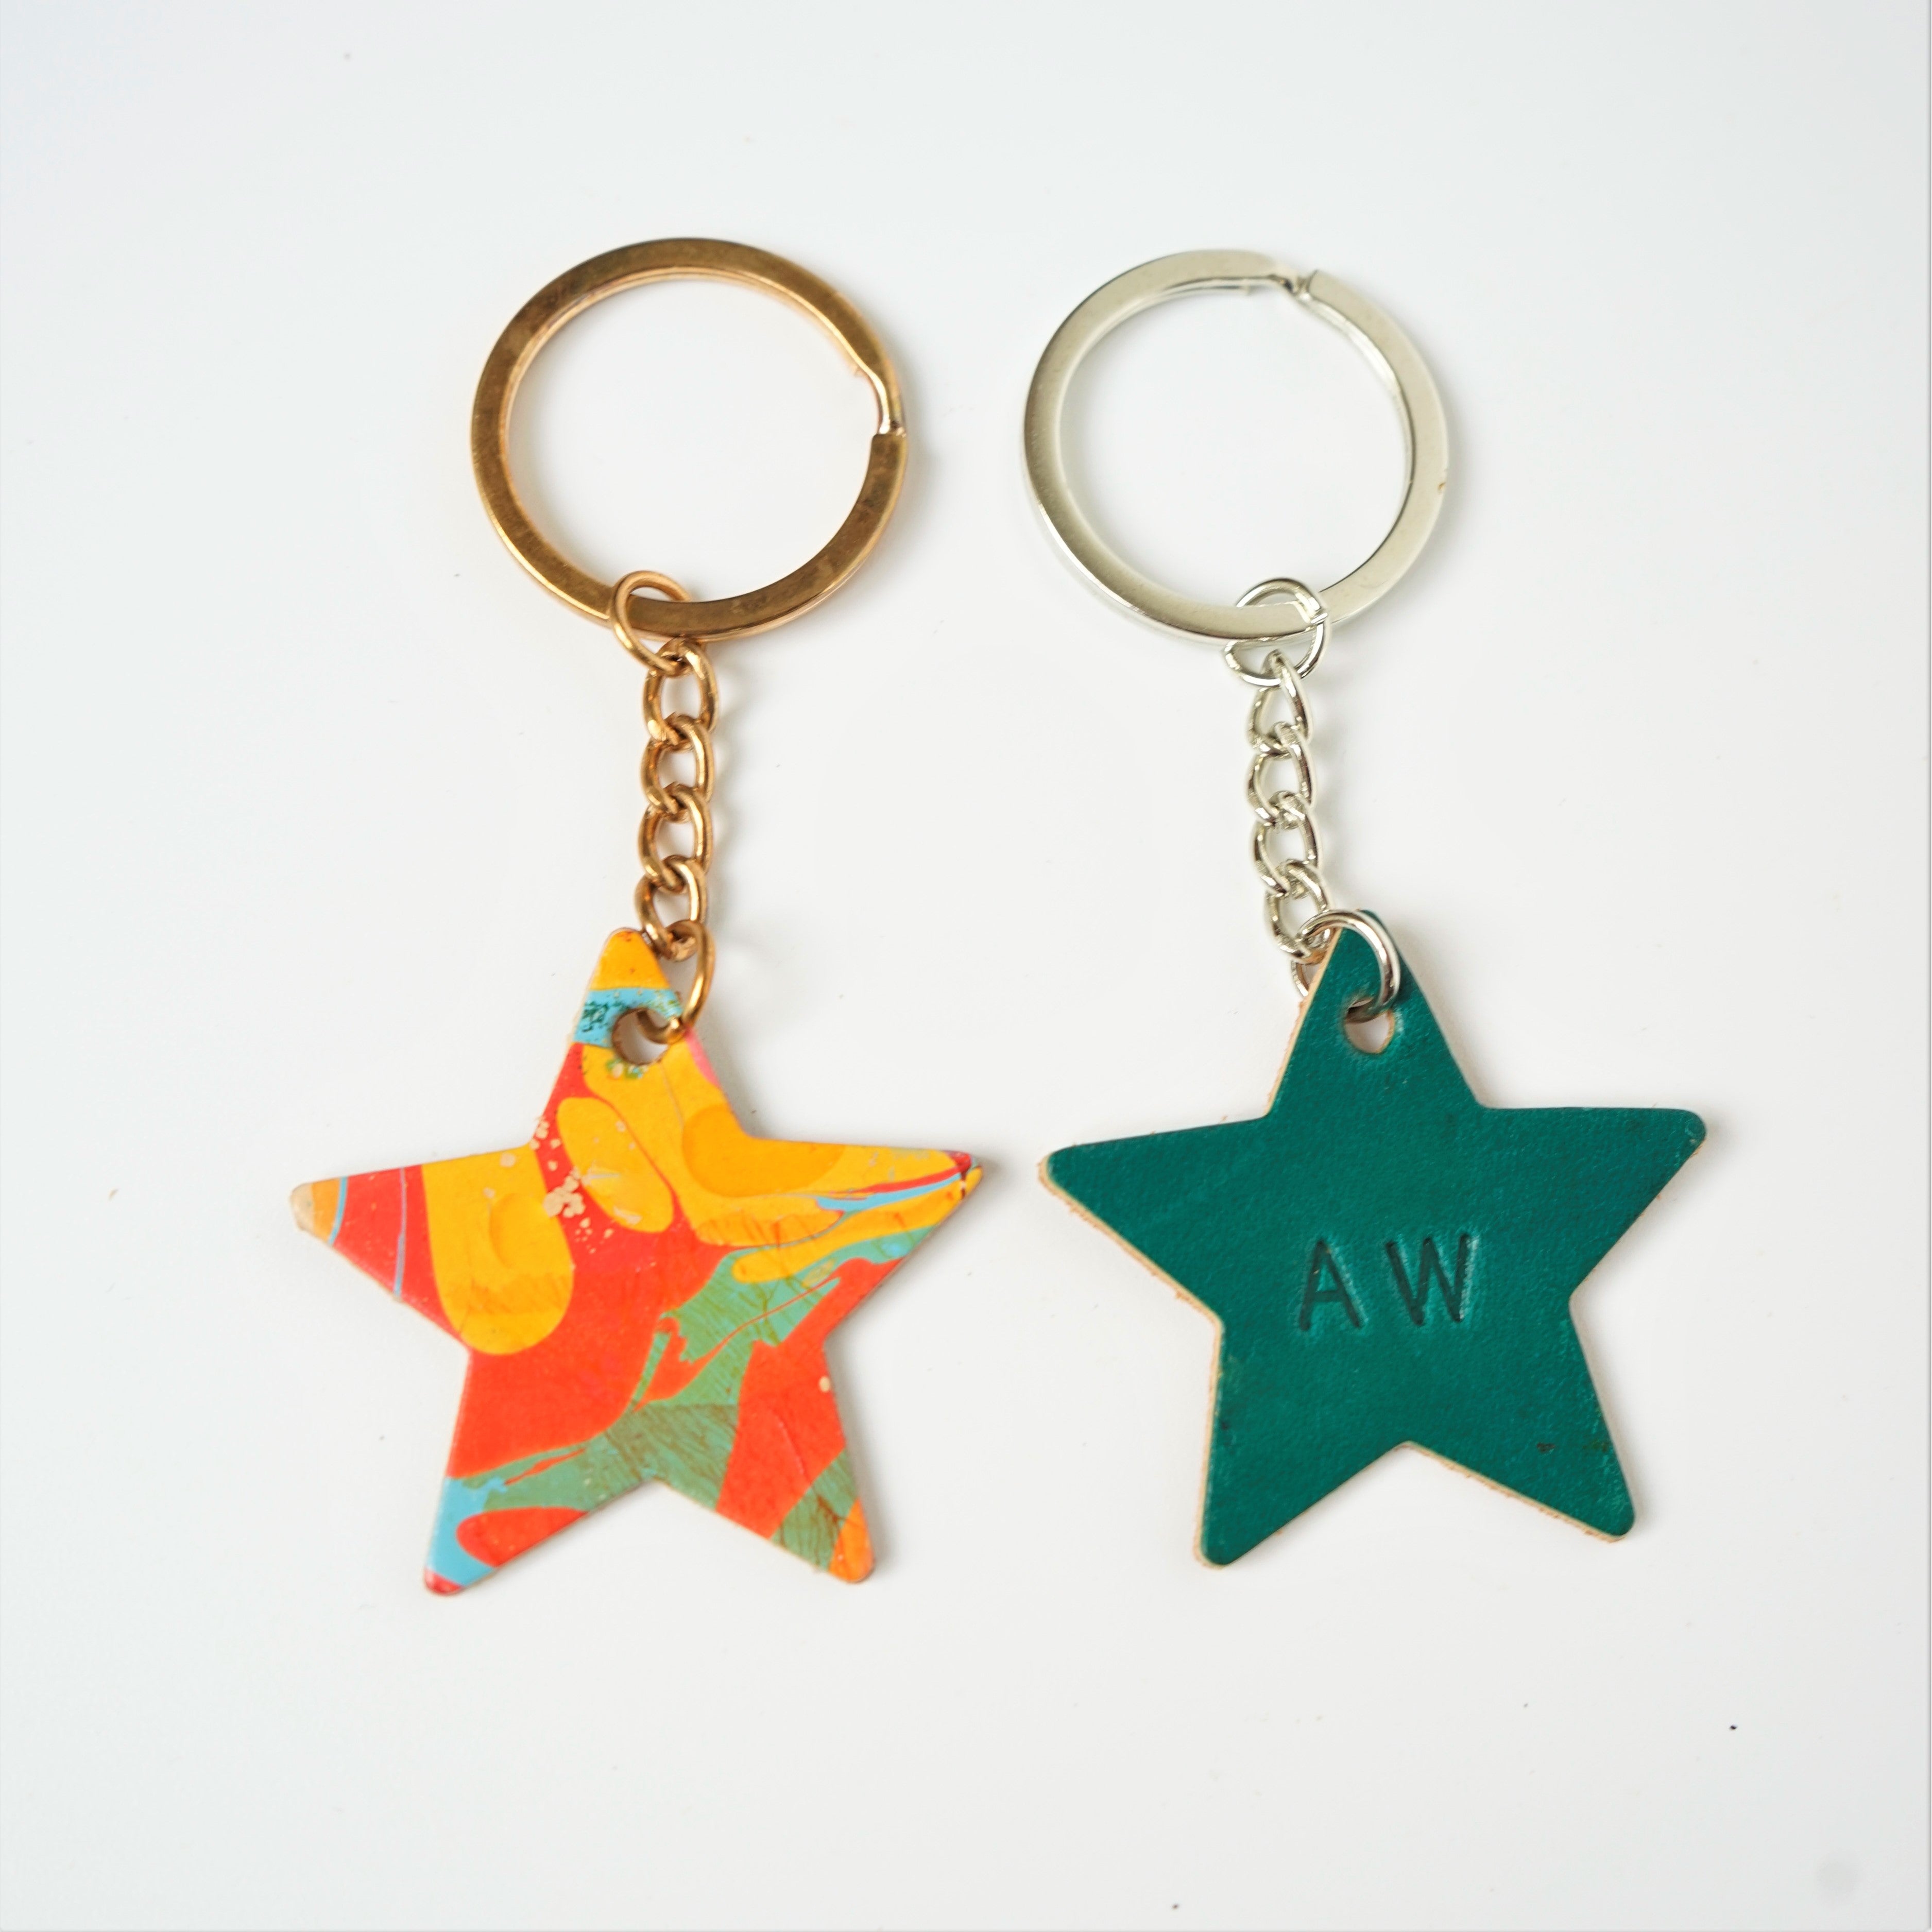 Handmade Leather Star Keyring - Personalisation Available